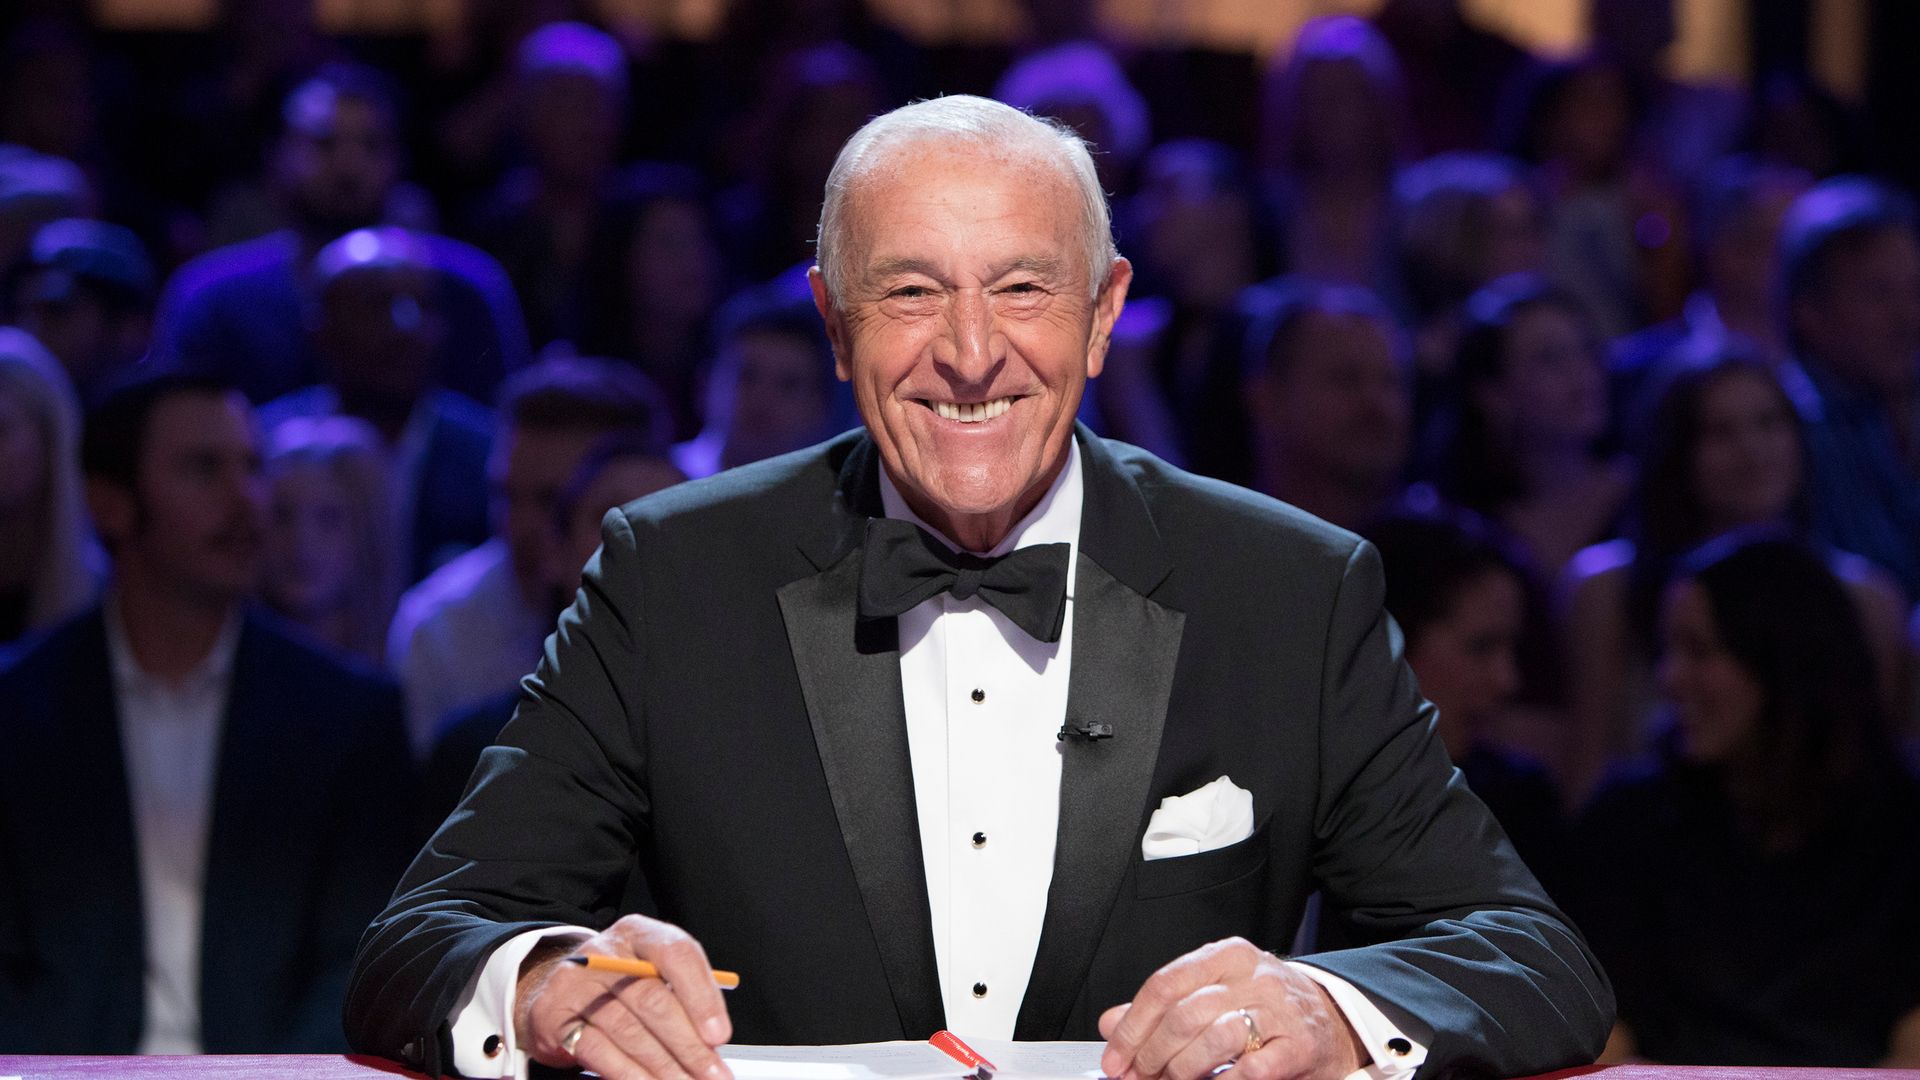 Len Goodman announced his retirement from DWTS after season 31